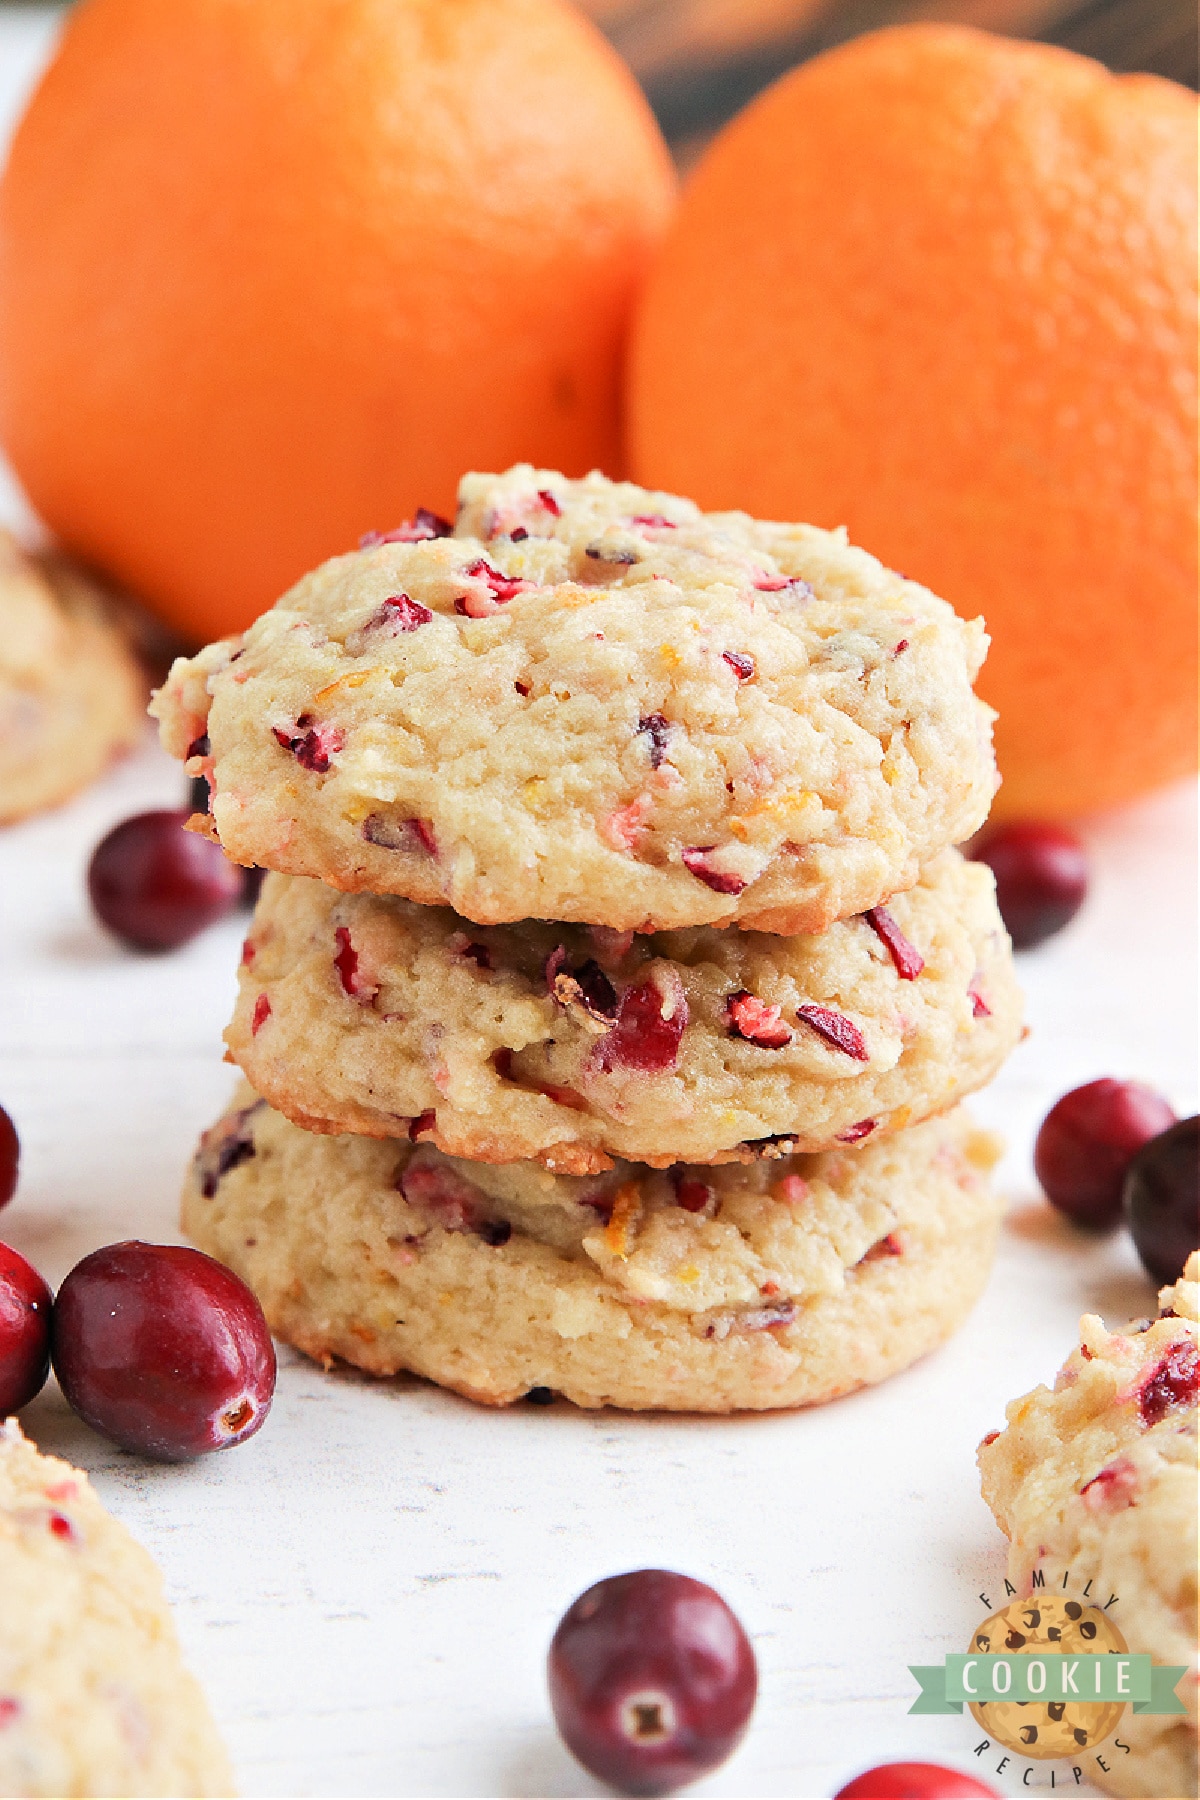 Cranberry Orange Cookies are soft, chewy and packed with orange flavor and fresh cranberries. The perfect cookie recipe for fall! 